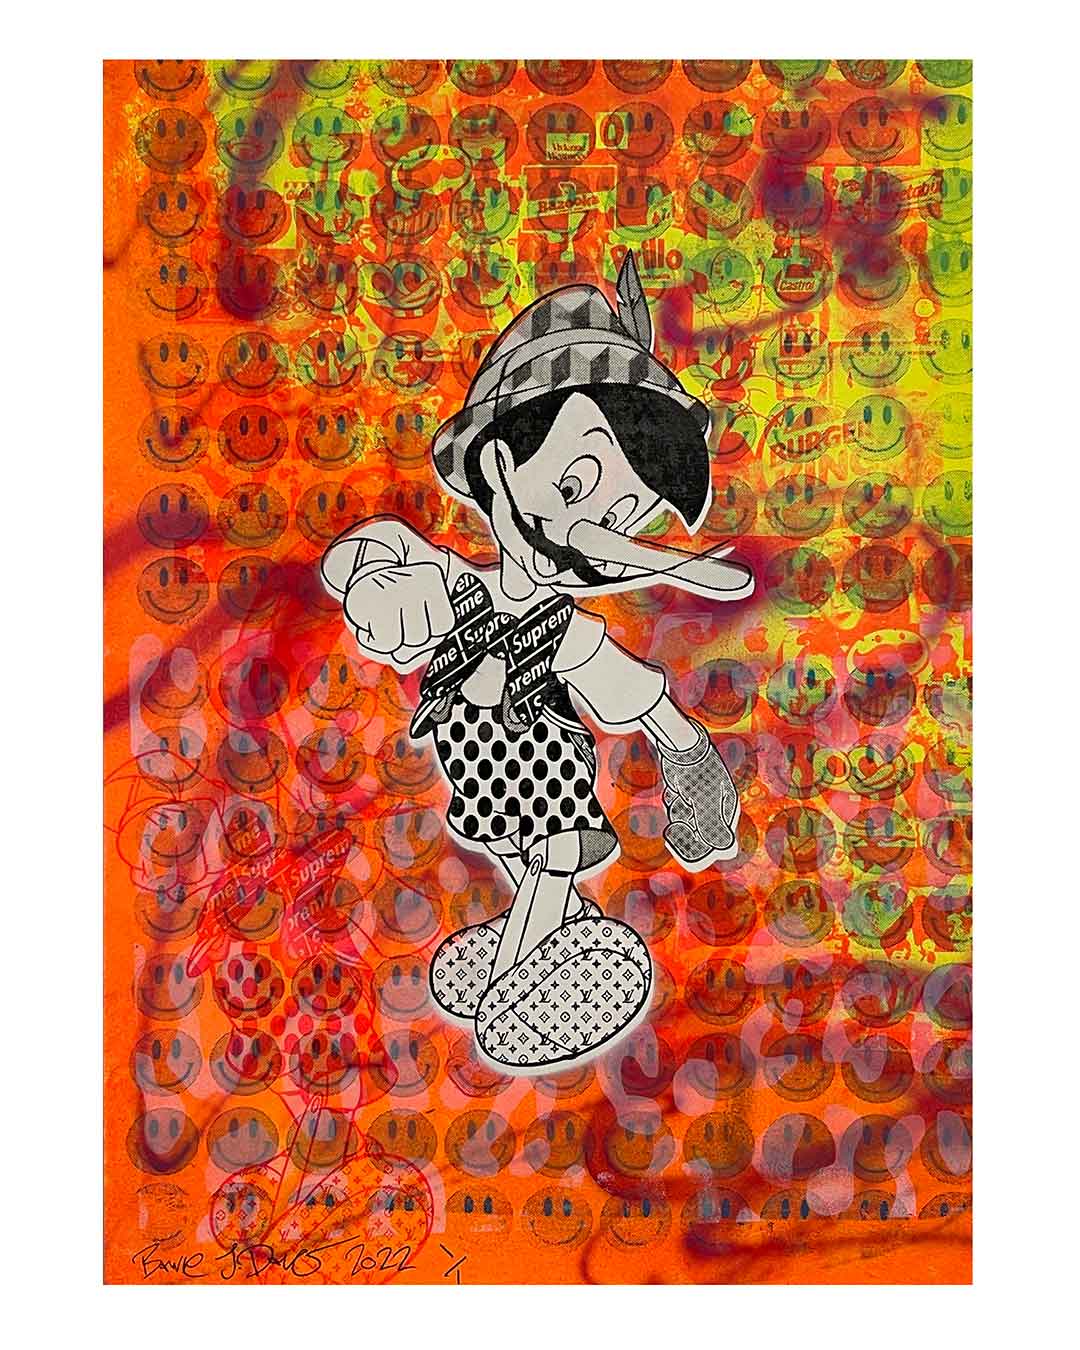 Hypebeast Boy Print by Barrie J Davies 2022 - unframed Silkscreen print on paper (hand finished) edition of 1/1 - A2 size 42cm x 59.4cm.